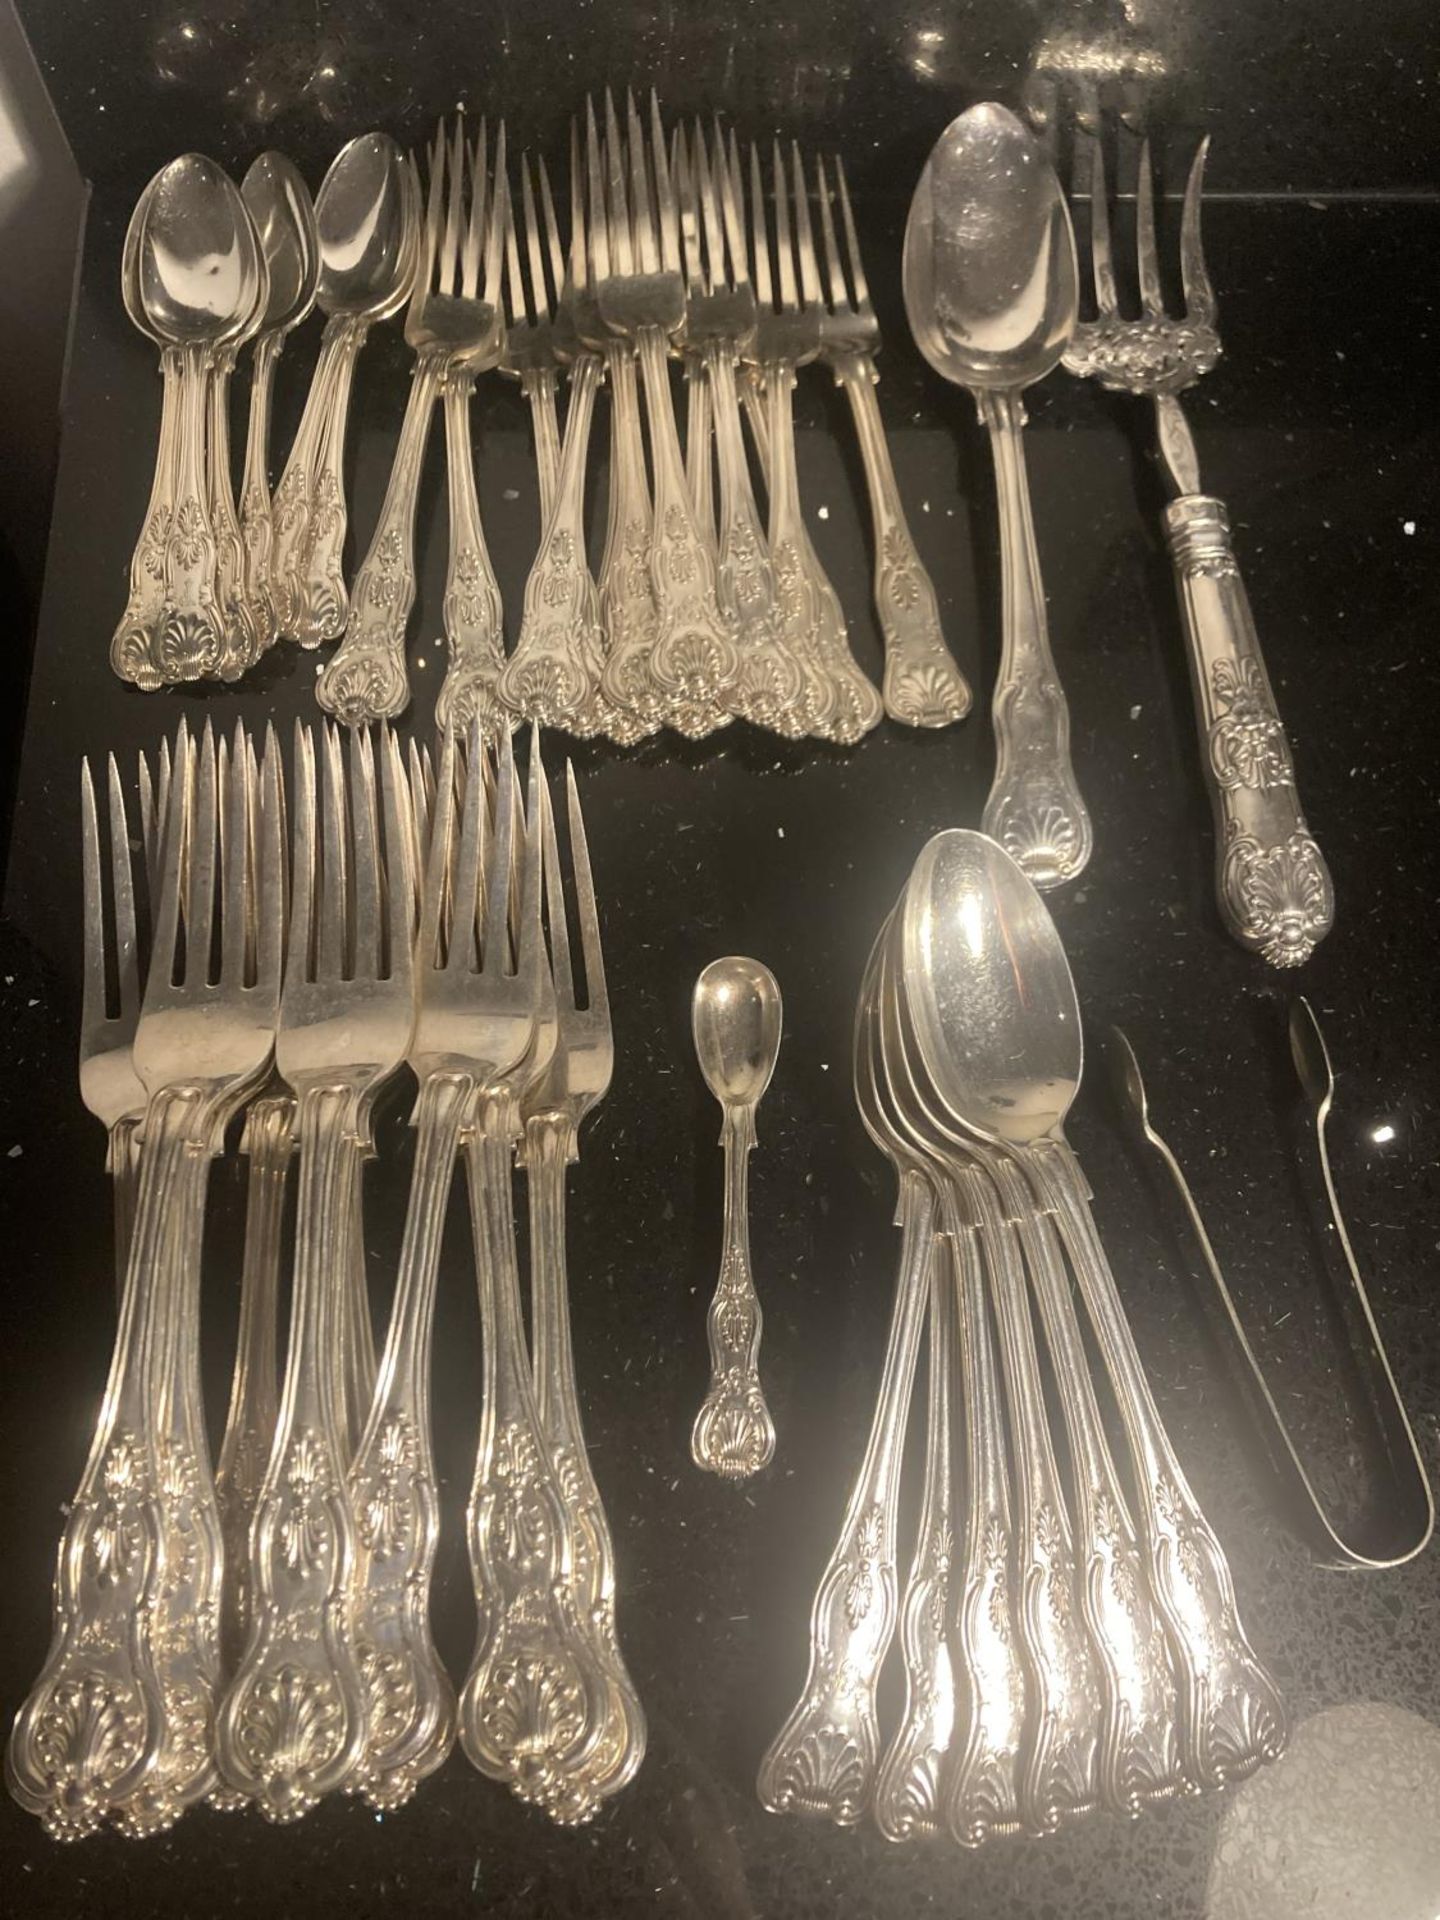 A LARGE QUANTITY OF HALLMARKED SILVER FLATWARE TO INCLUDE FORKS, SPOONS ETC GROSS WEIGHT 2976 GRAMS